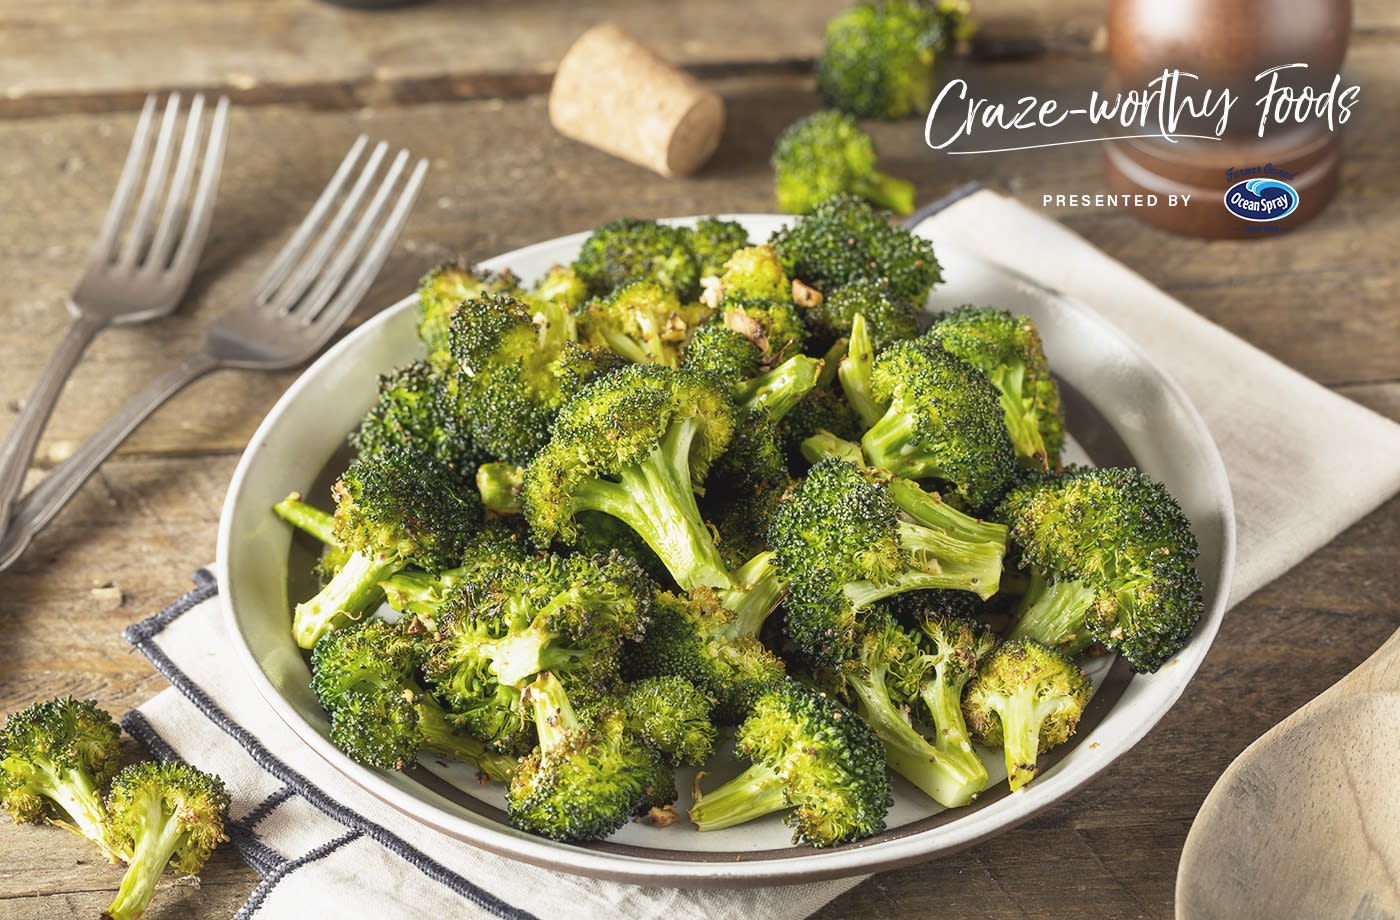 Health benefits of broccoli you've probably never heard of